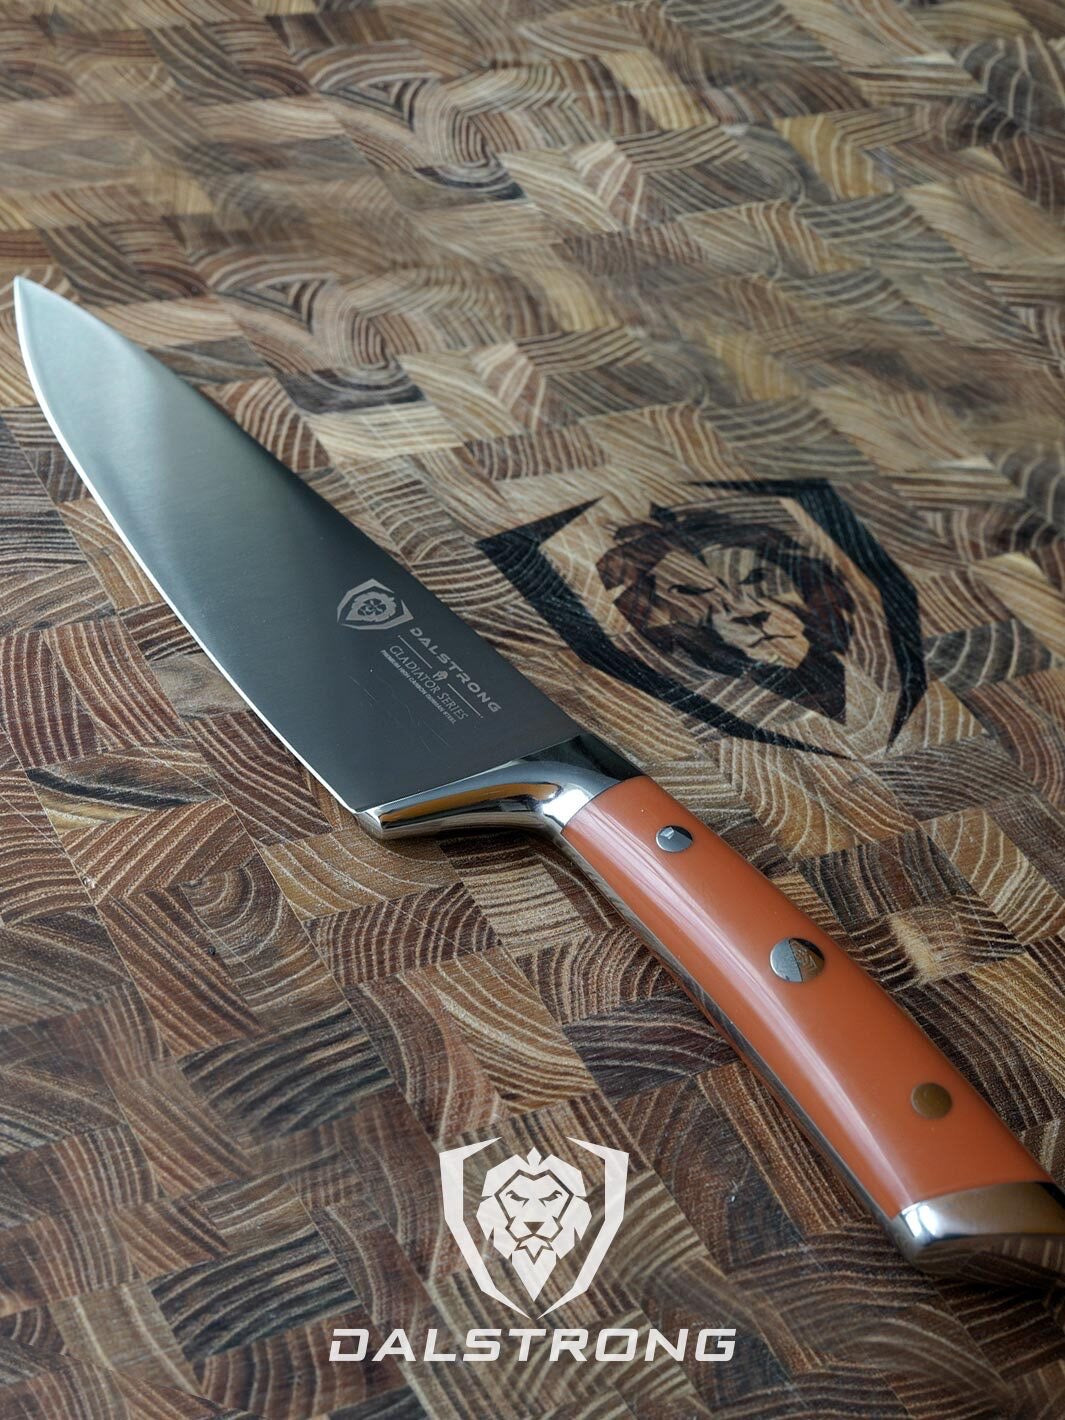 Dalstrong gladiator series 8 inch chef knife with orange handle on top of a dalstrong wooden board.